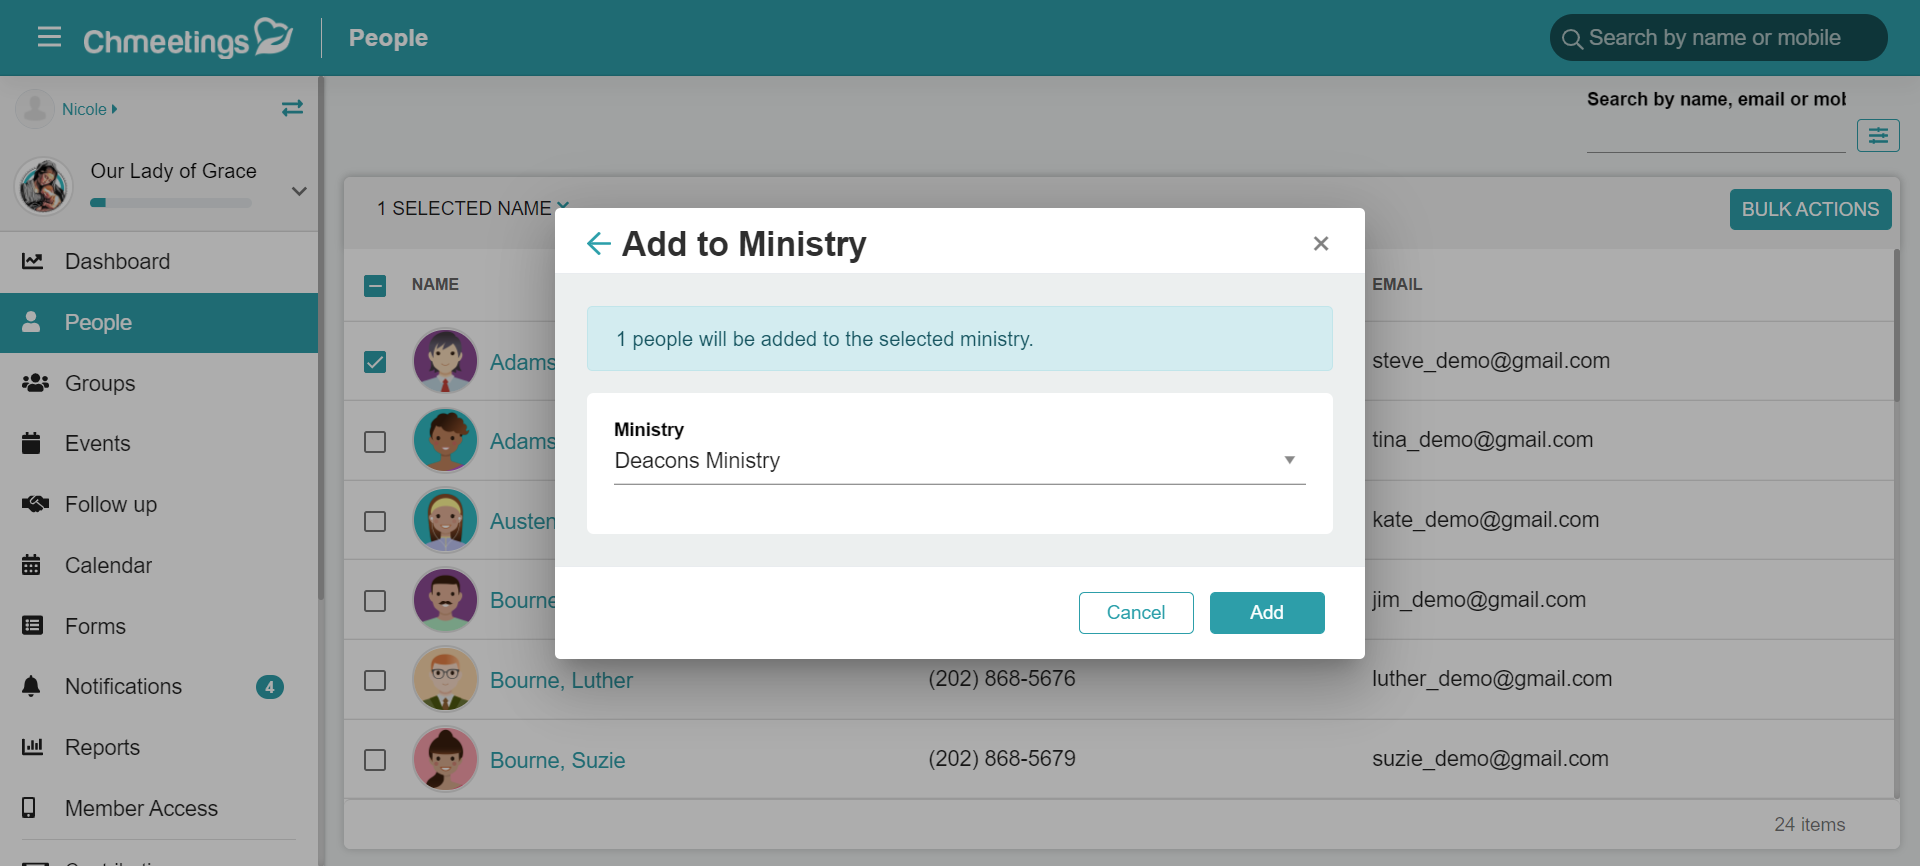 3_select_ministry.png